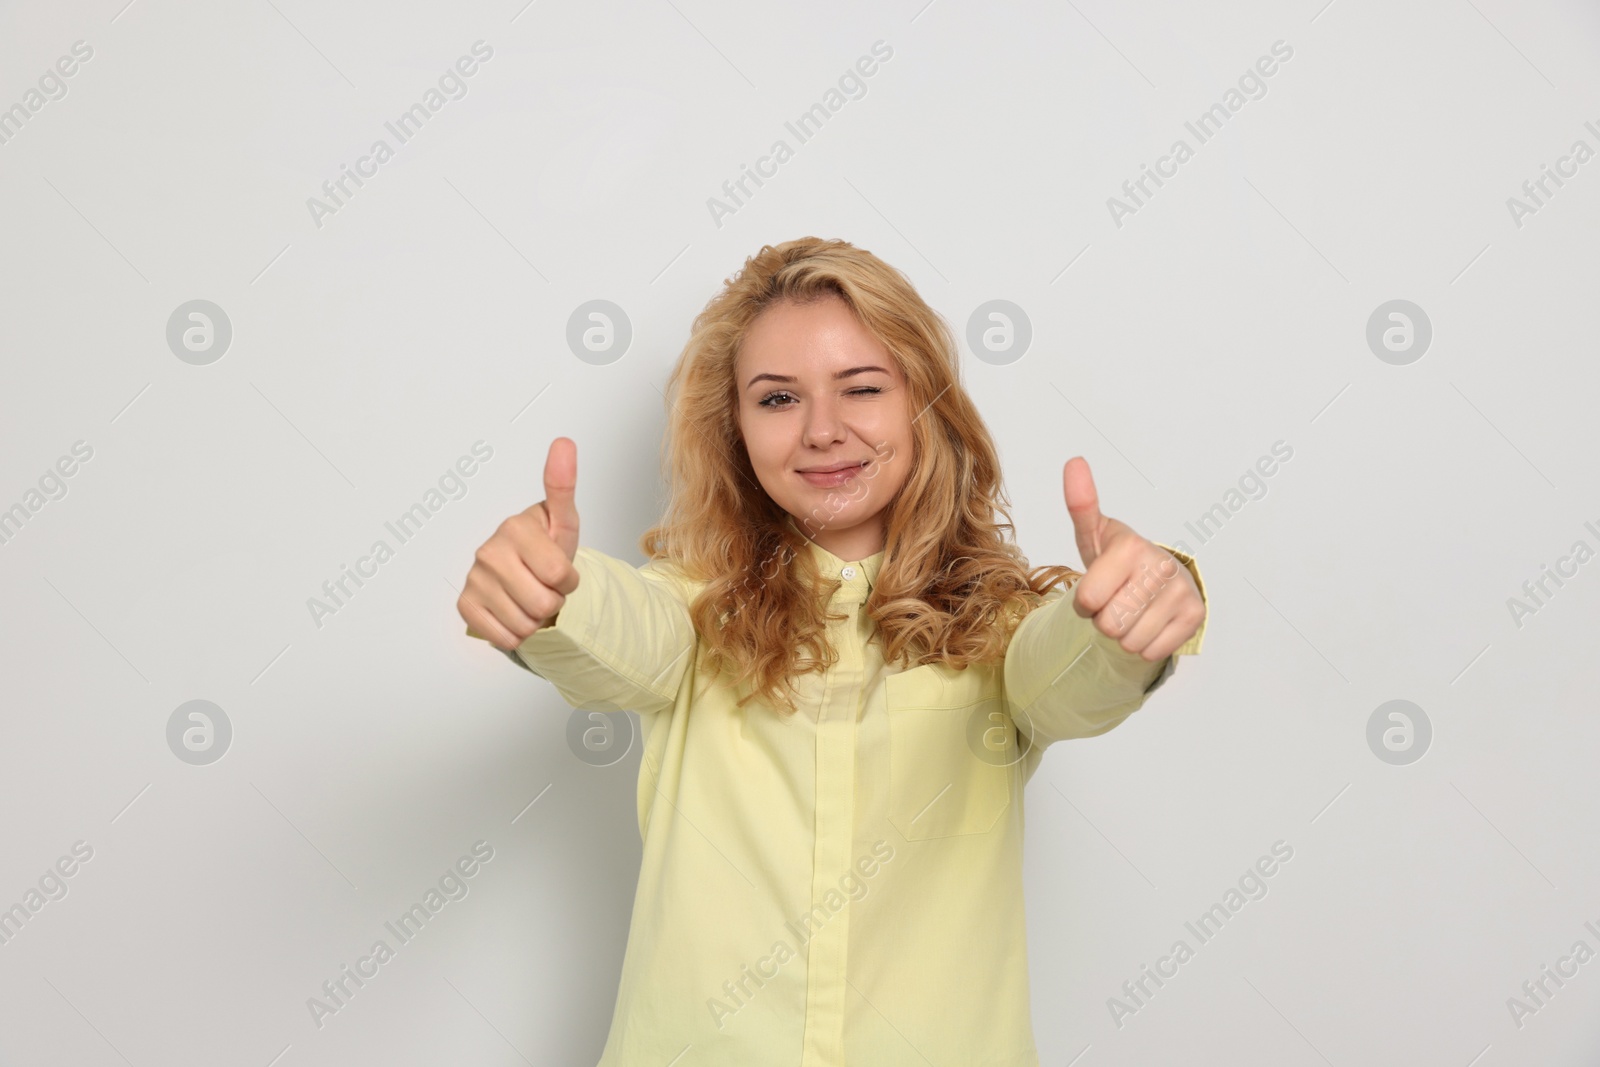 Photo of Happy young woman showing thumbs up on white background